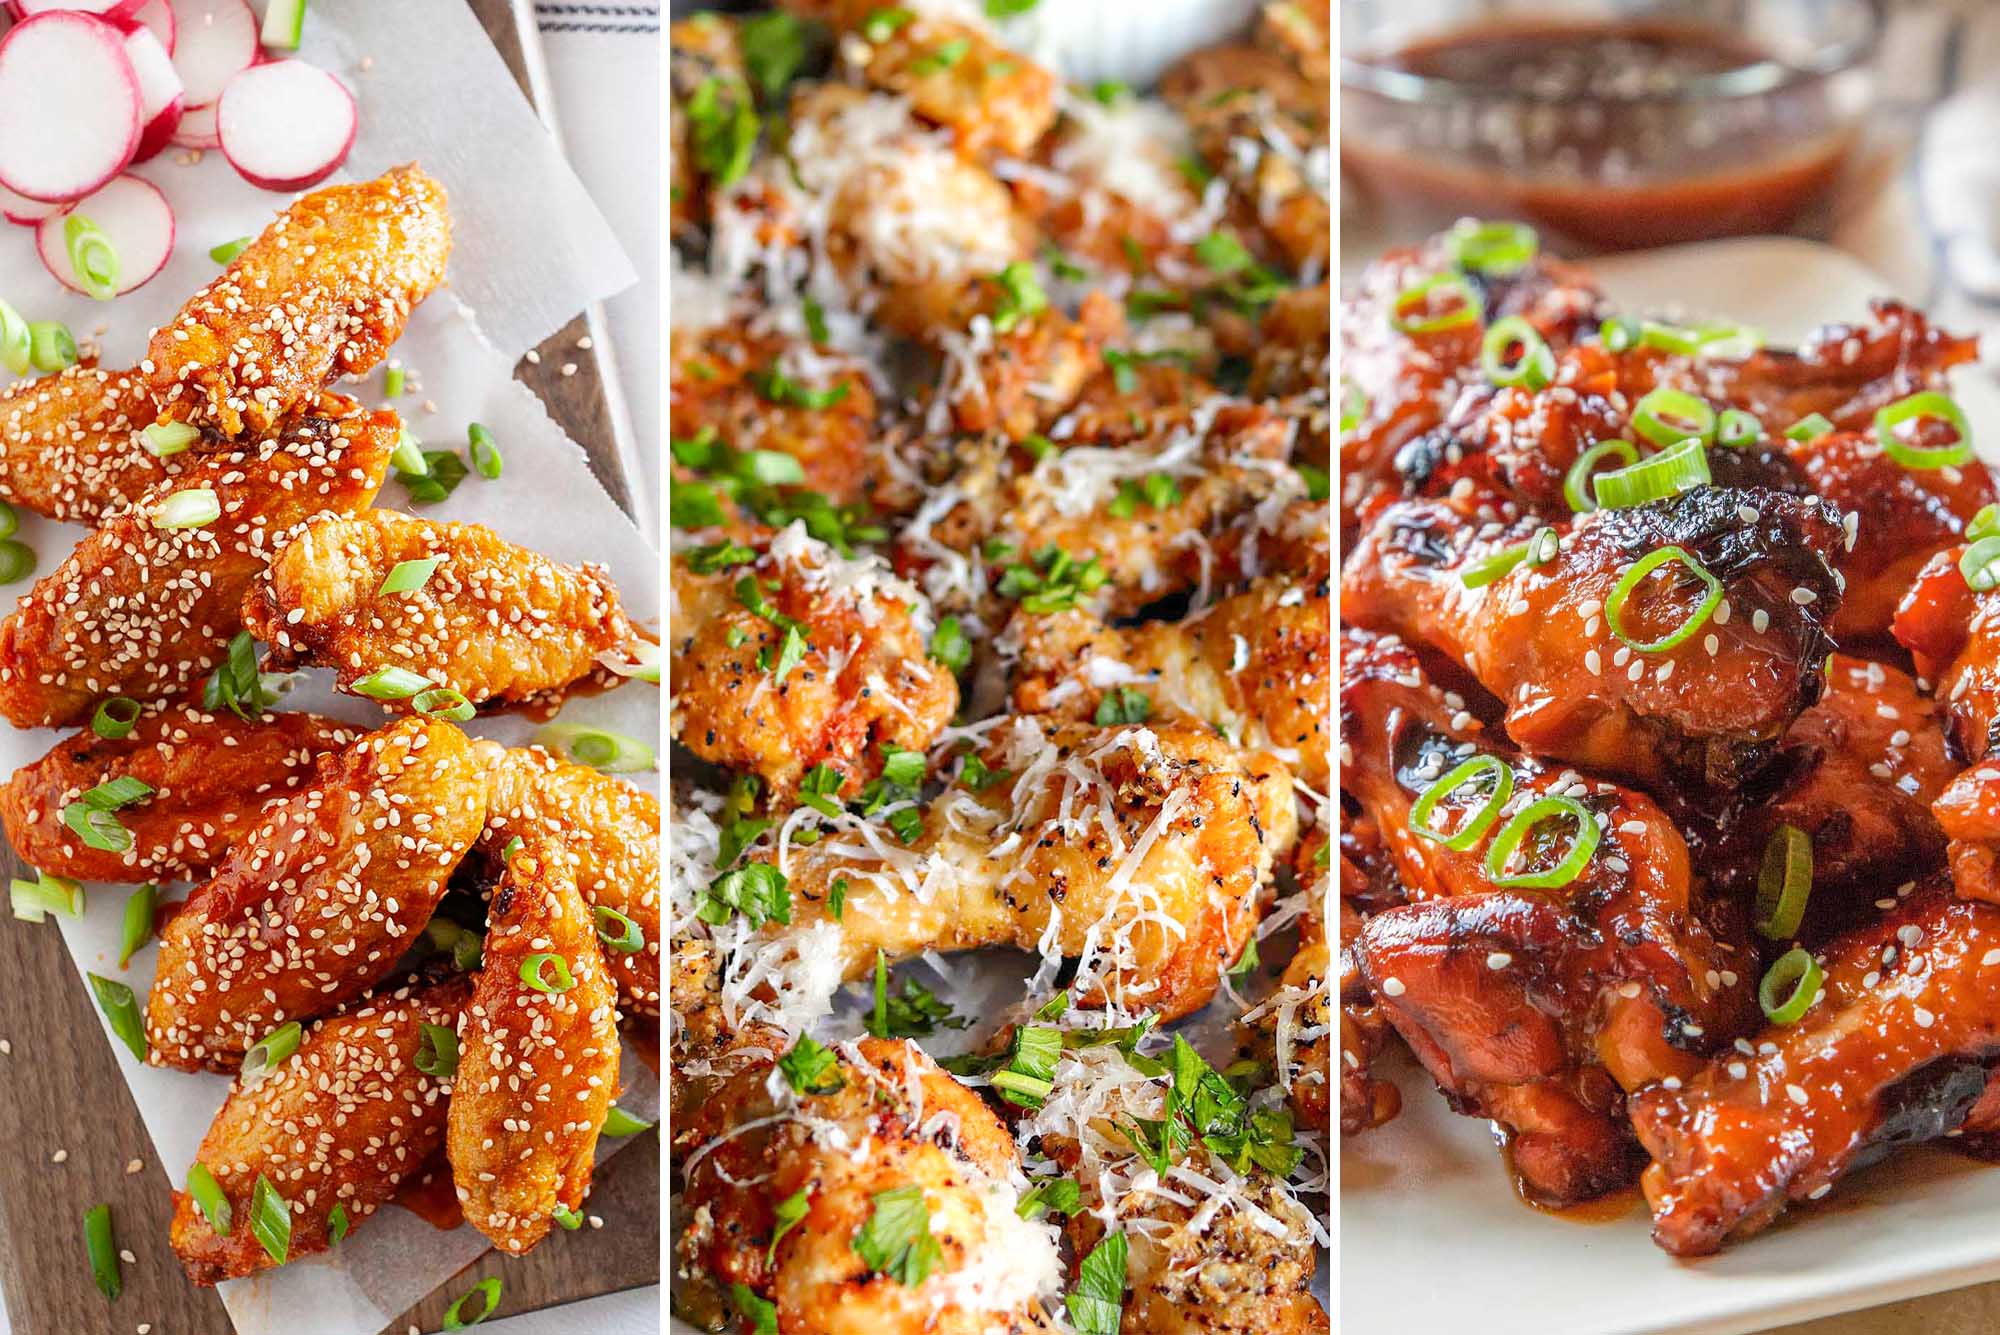 11 Wing Recipes for Your Super Bowl